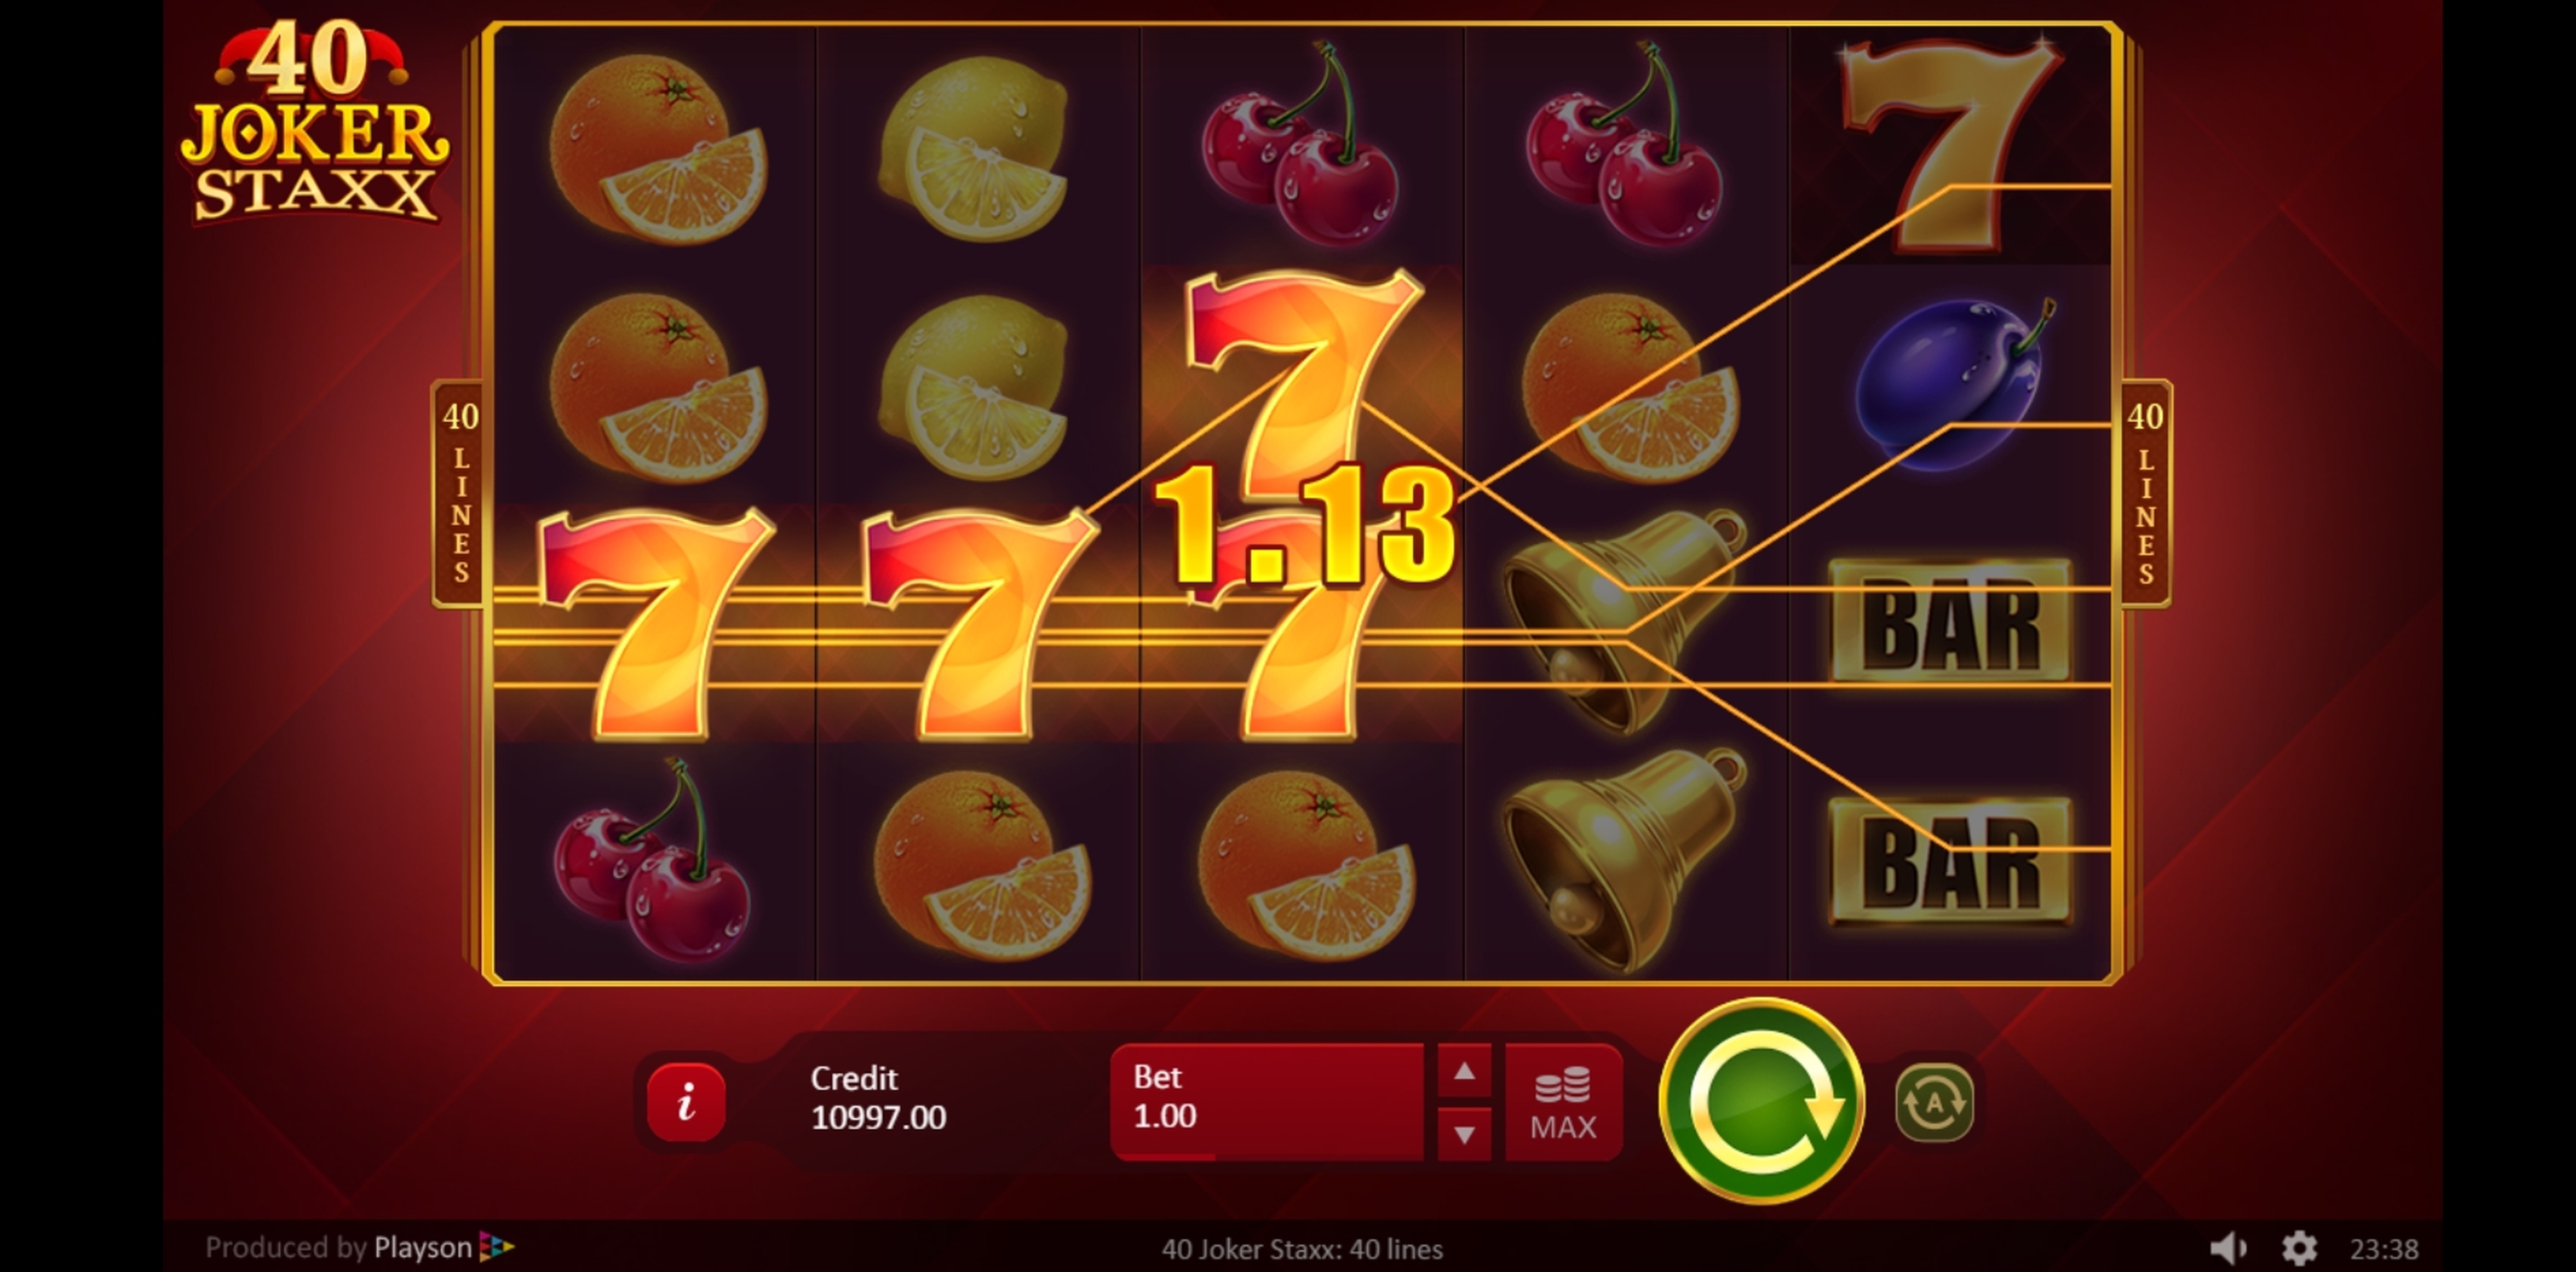 Win Money in 40 Joker Staxx: 40 lines Free Slot Game by Playson